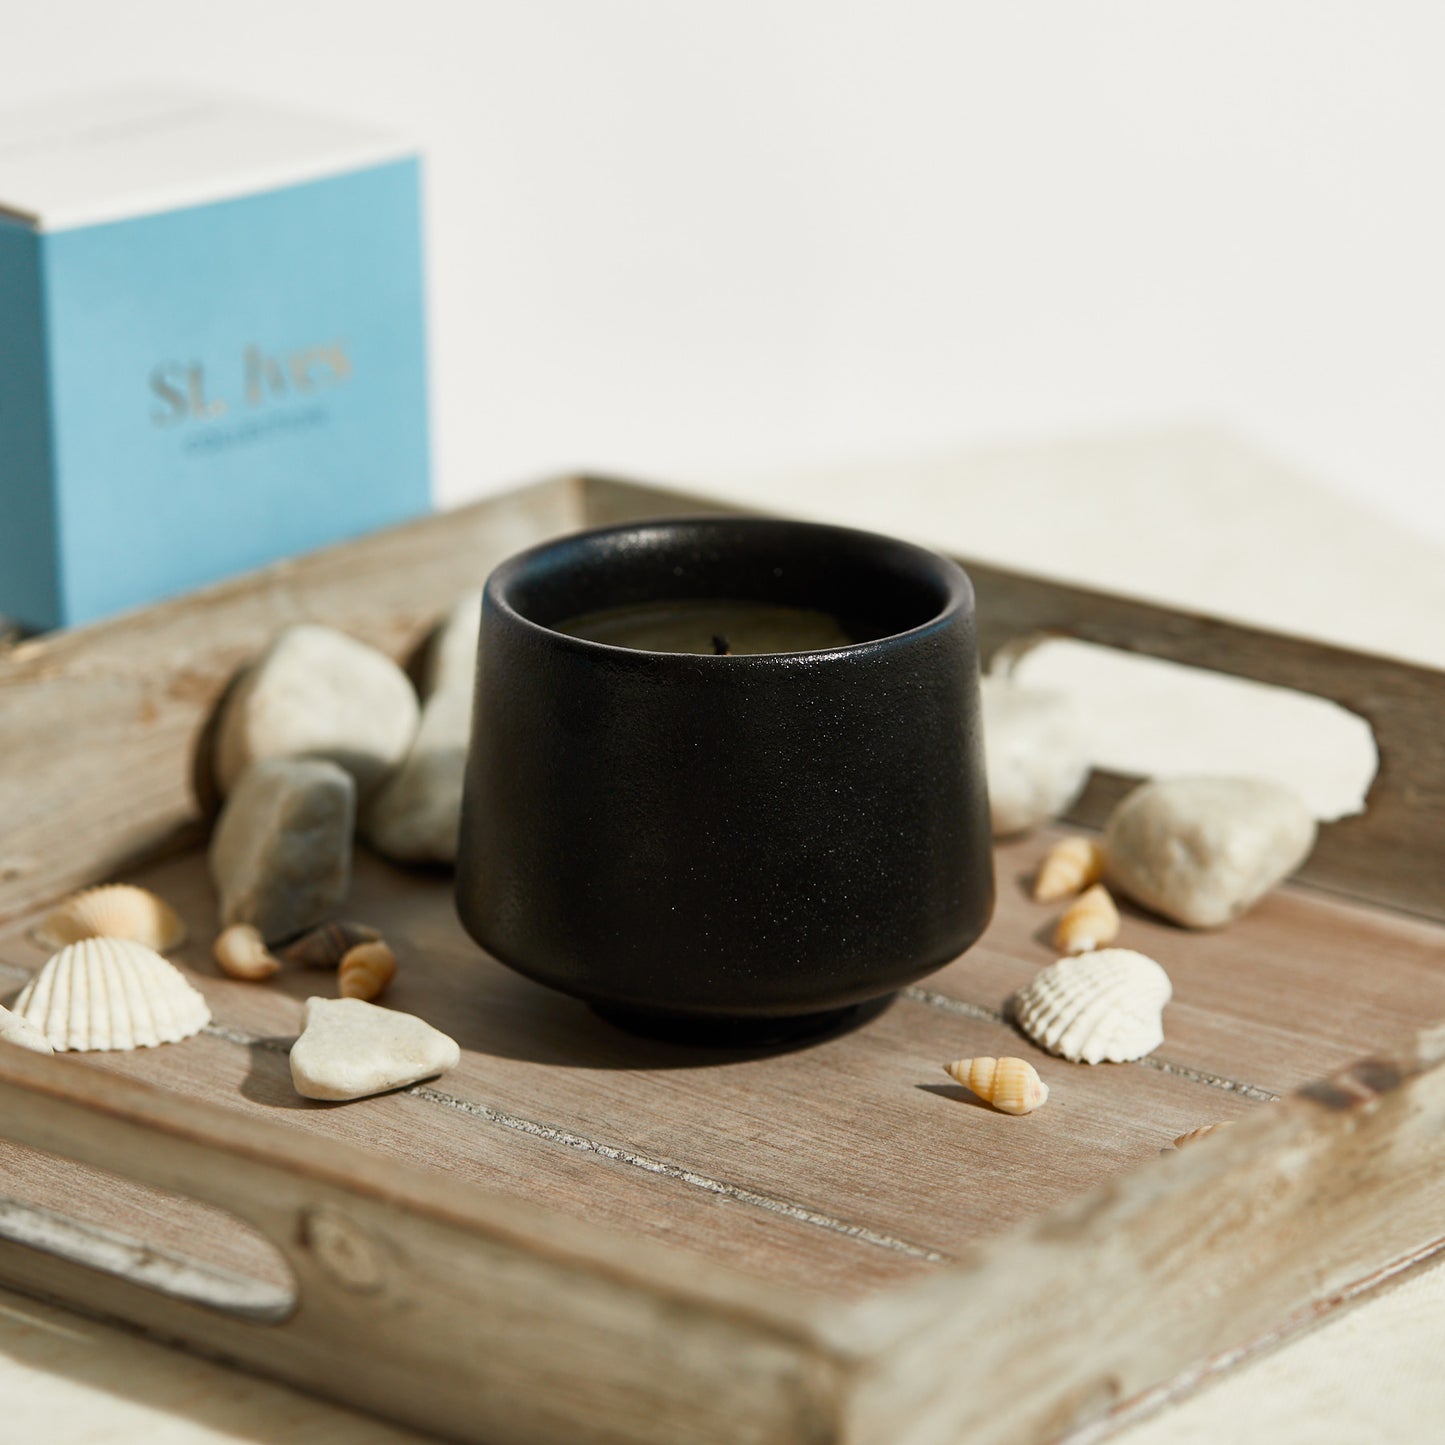 St Ives: Constantine Bay Candle - Activated Charcoal & Matcha